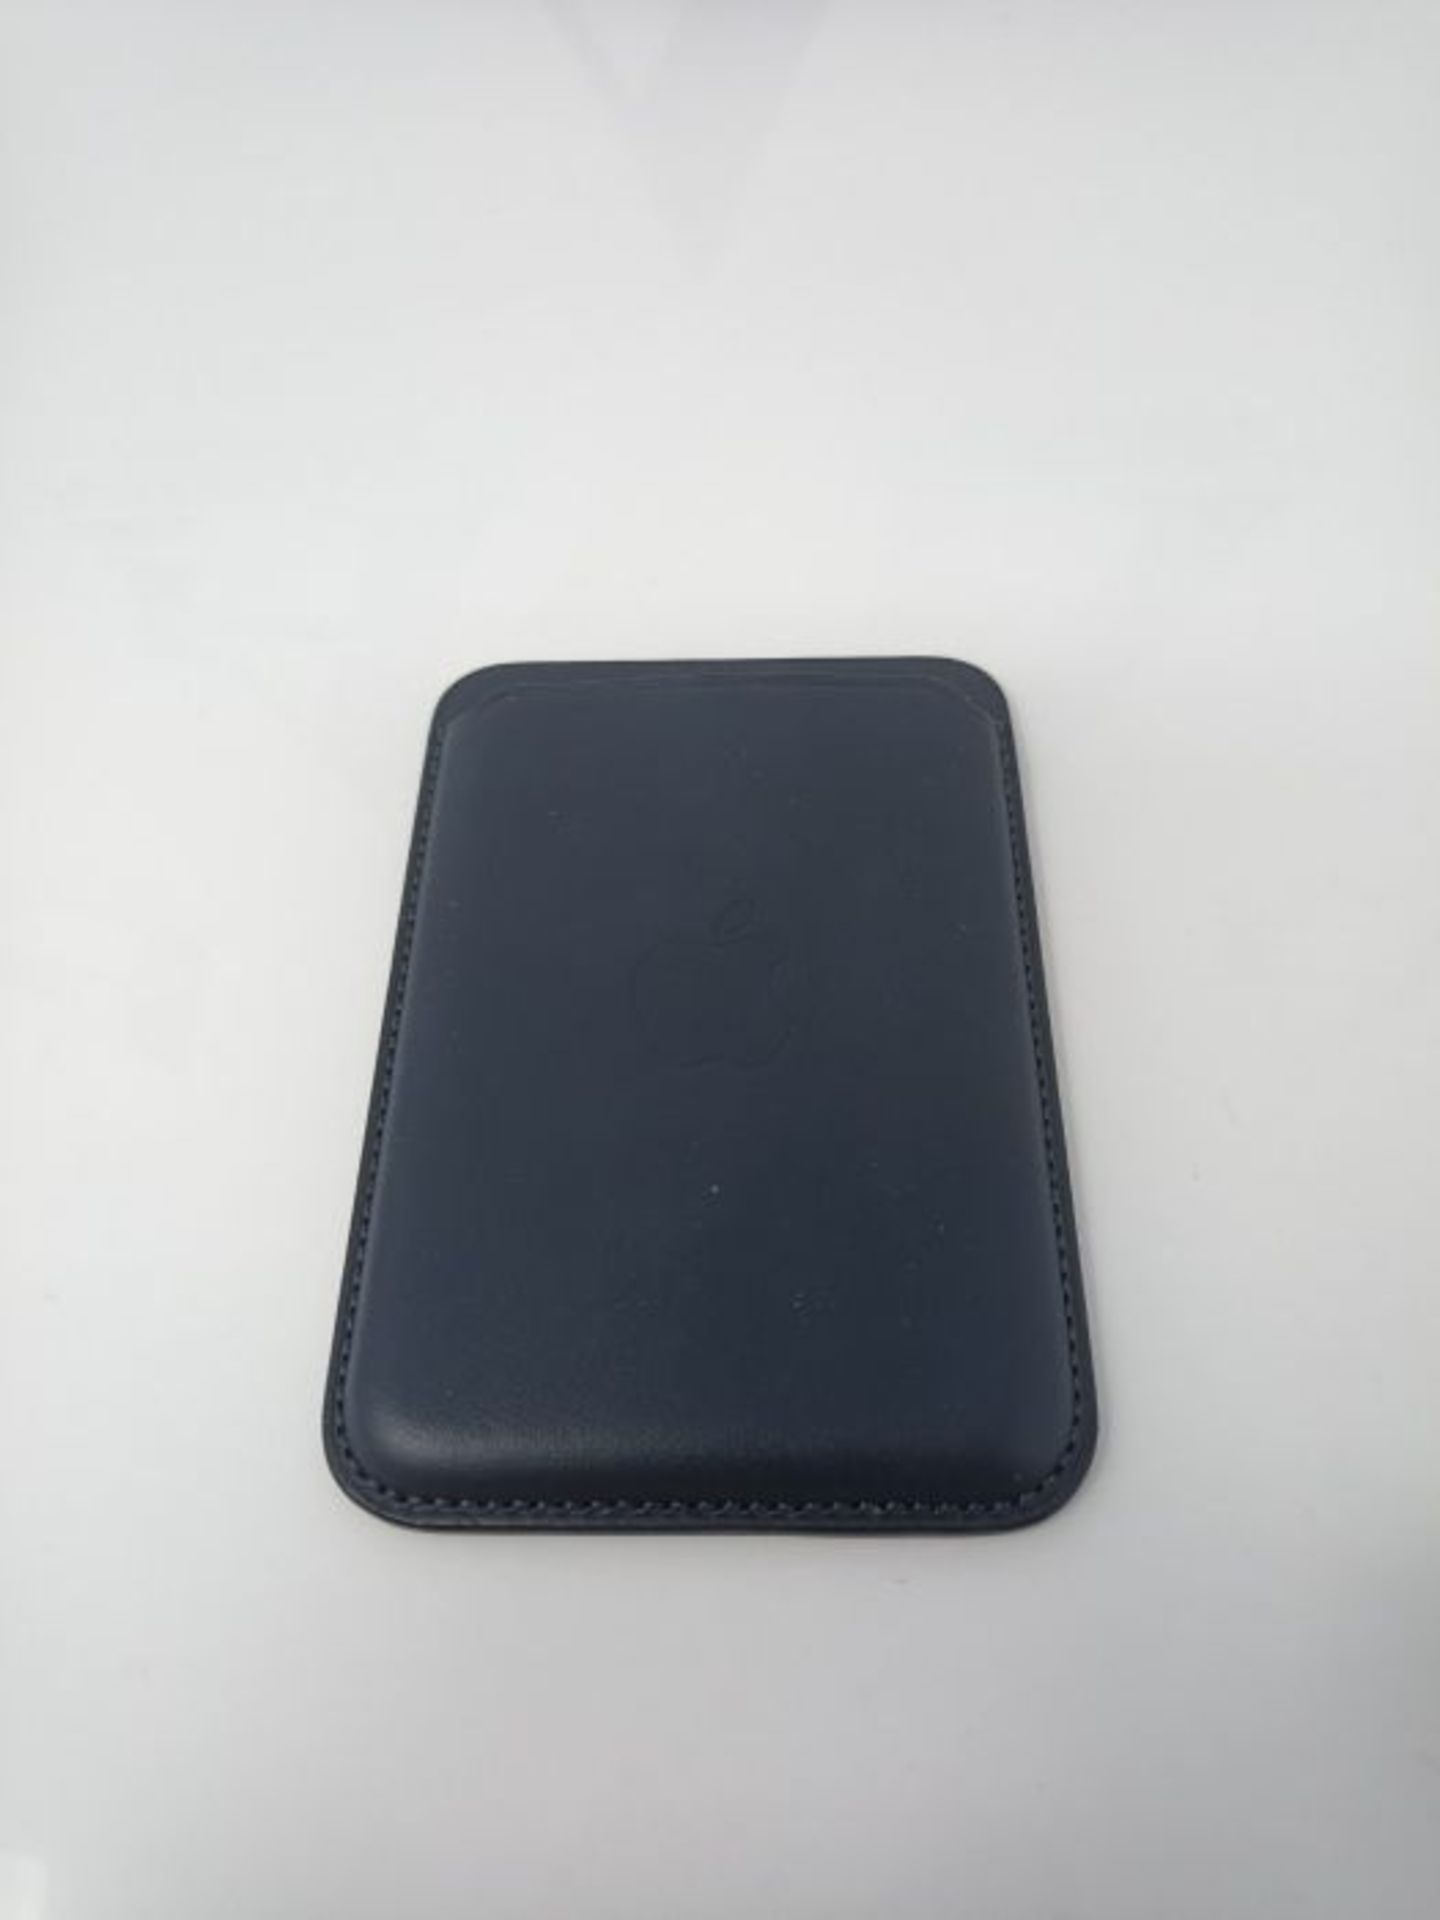 Apple Leather Wallet with MagSafe (for iPhone) - Midnight - Image 3 of 3